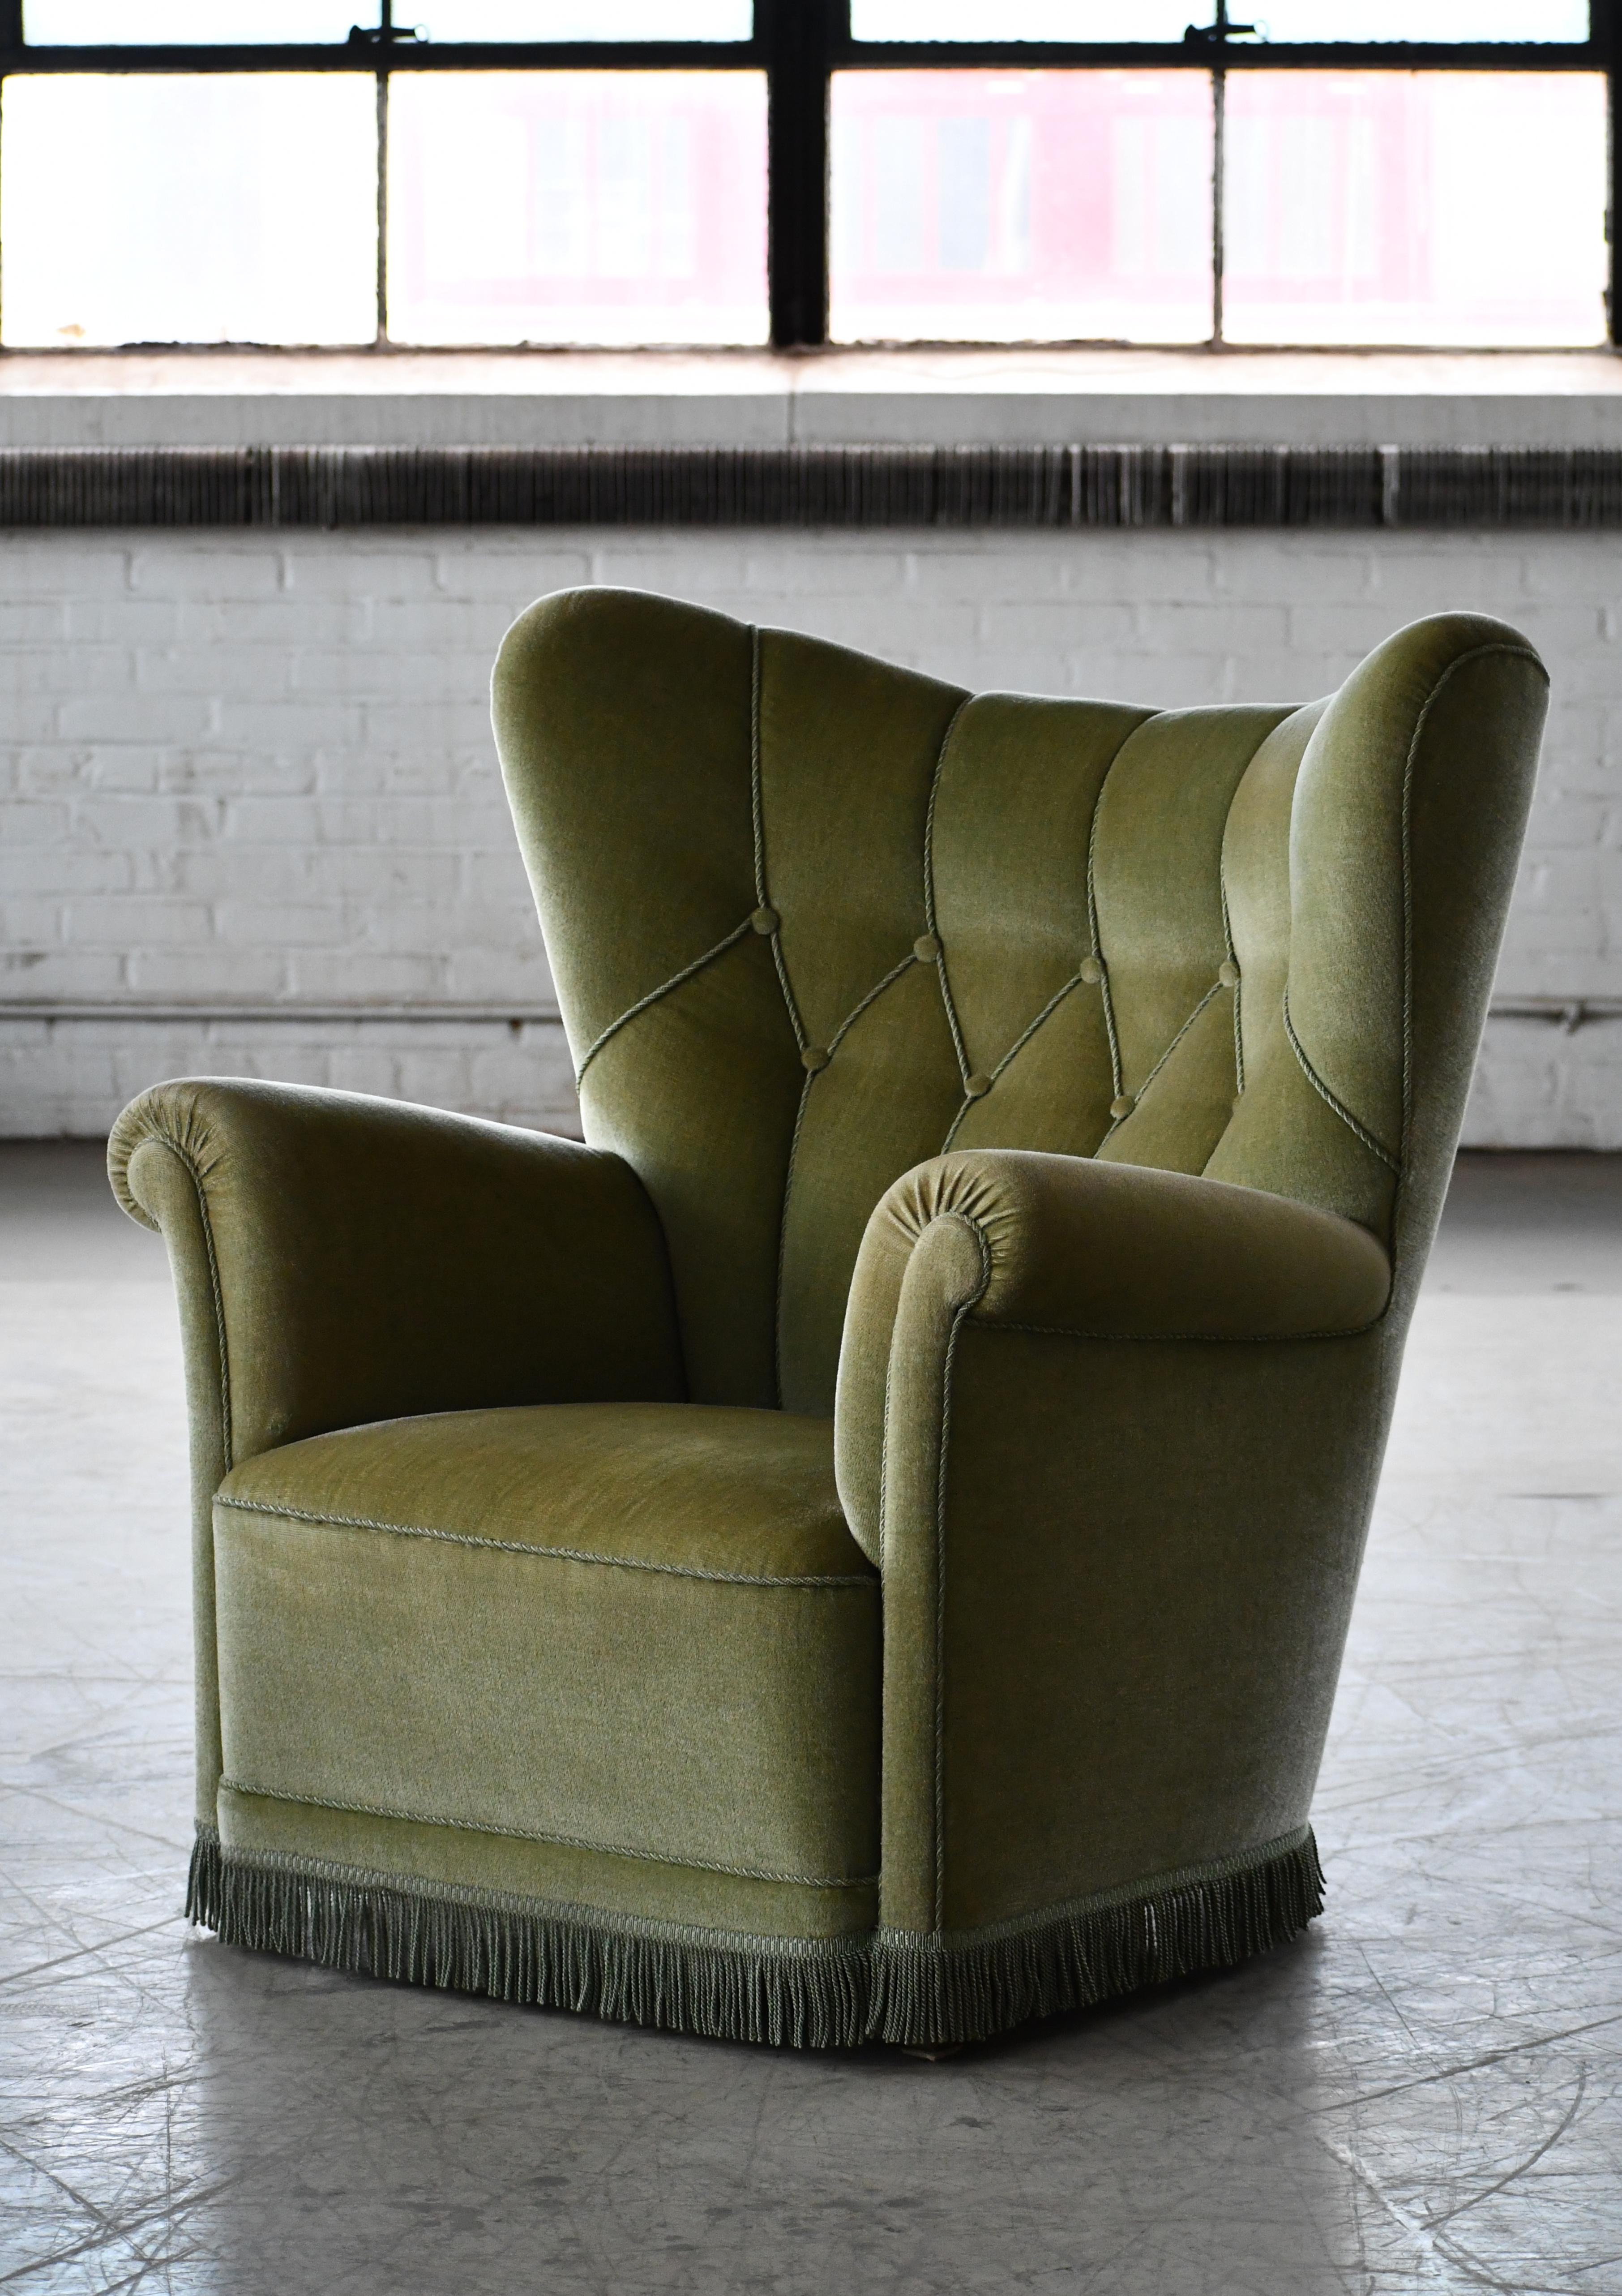 Danish Mid-Century Lounge or Club Chair in Green Mohair, 1940's For Sale 5